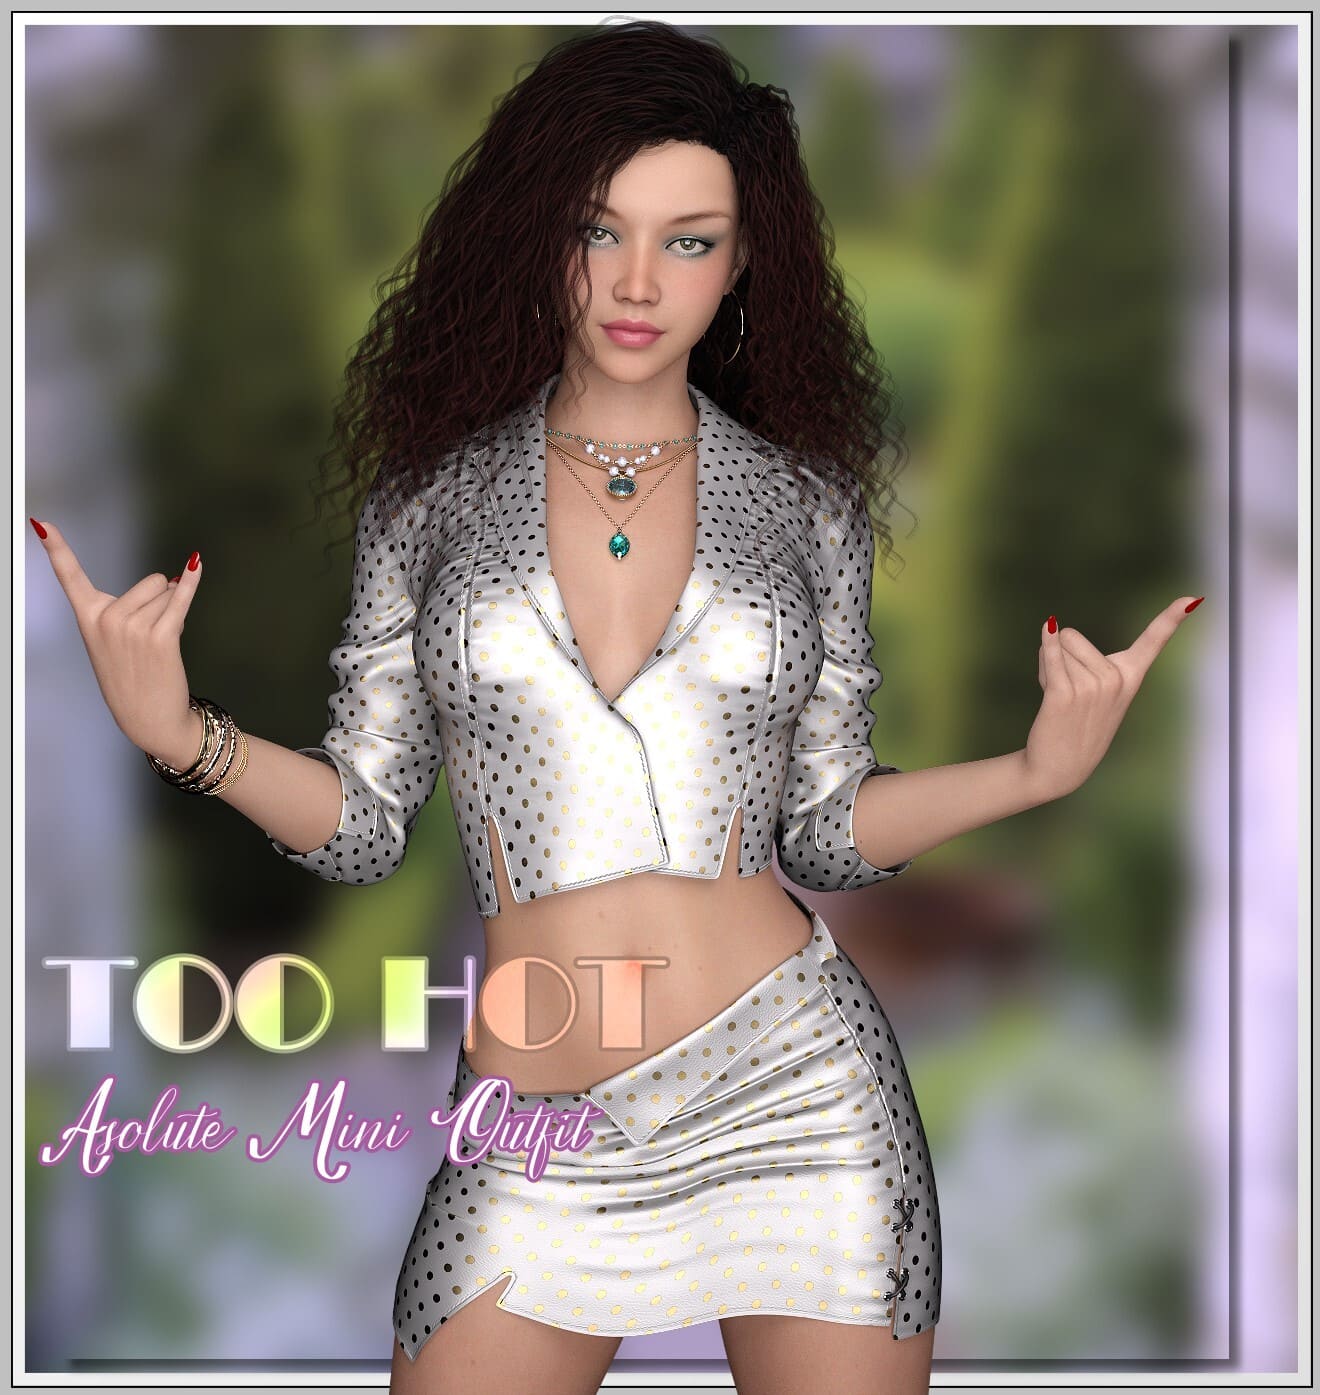 Too Hot -Absolute Mini Outfit_DAZ3DDL